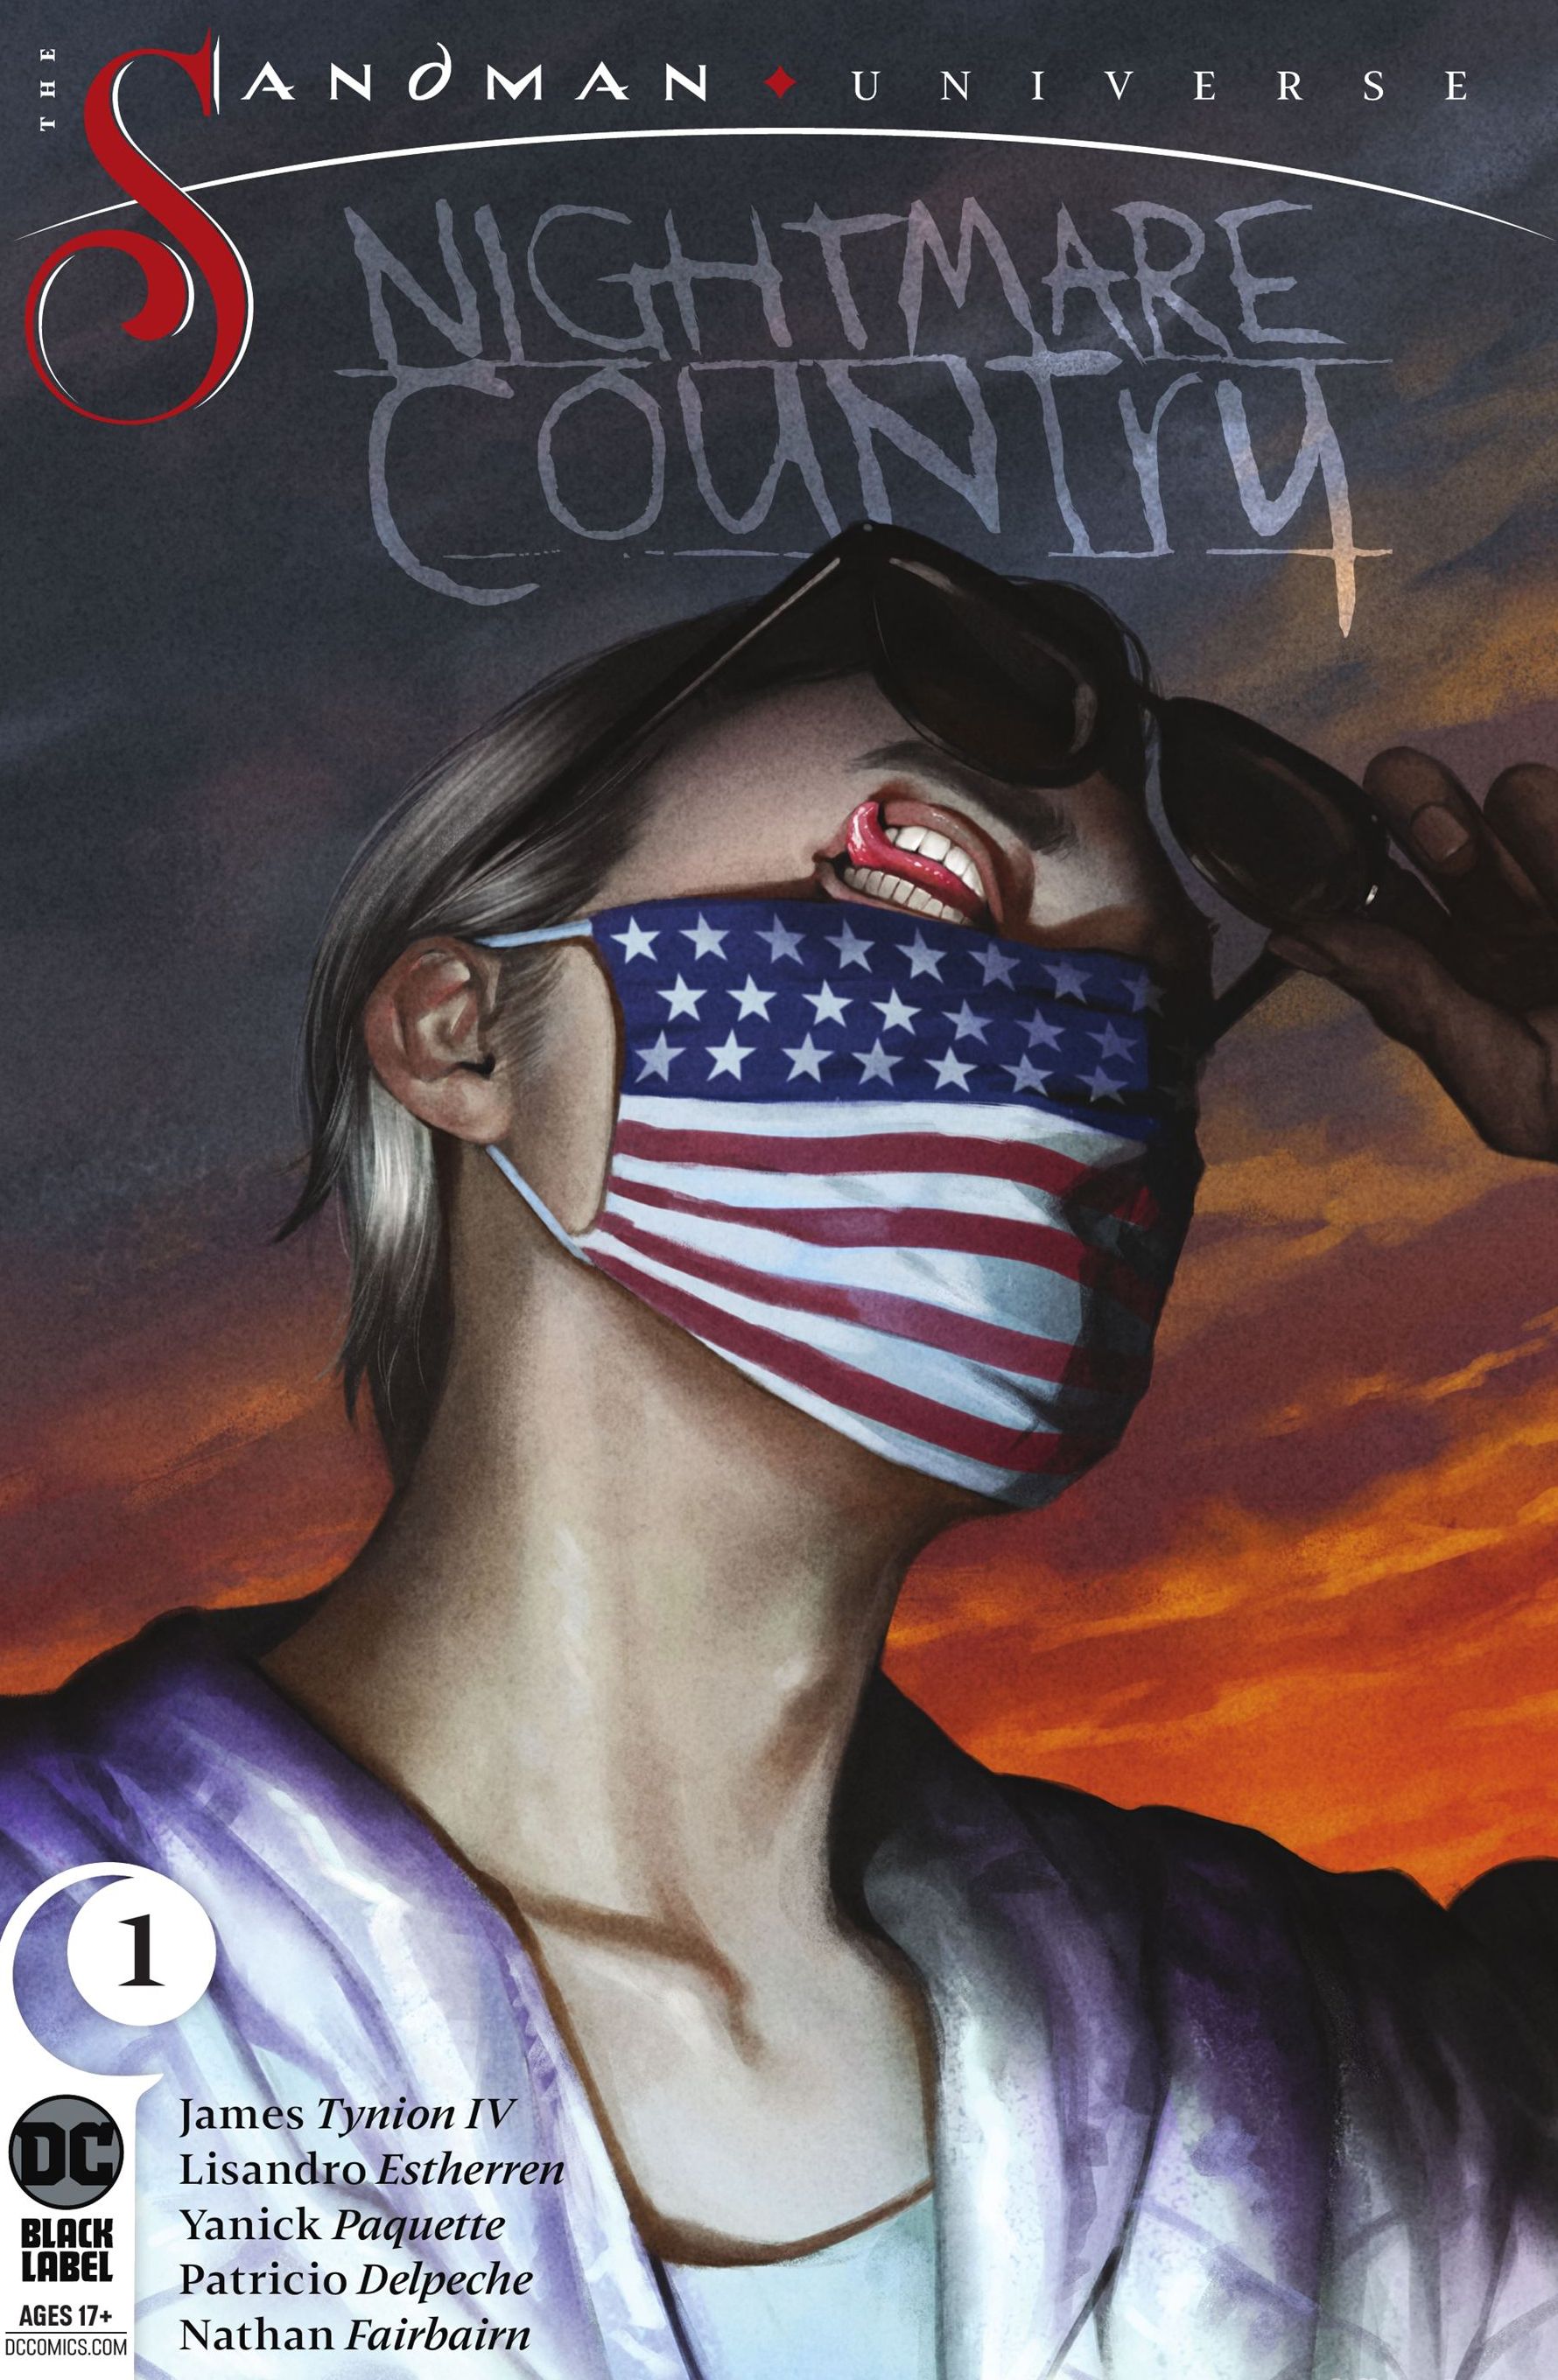 sandman universe nightmare country #1 cover